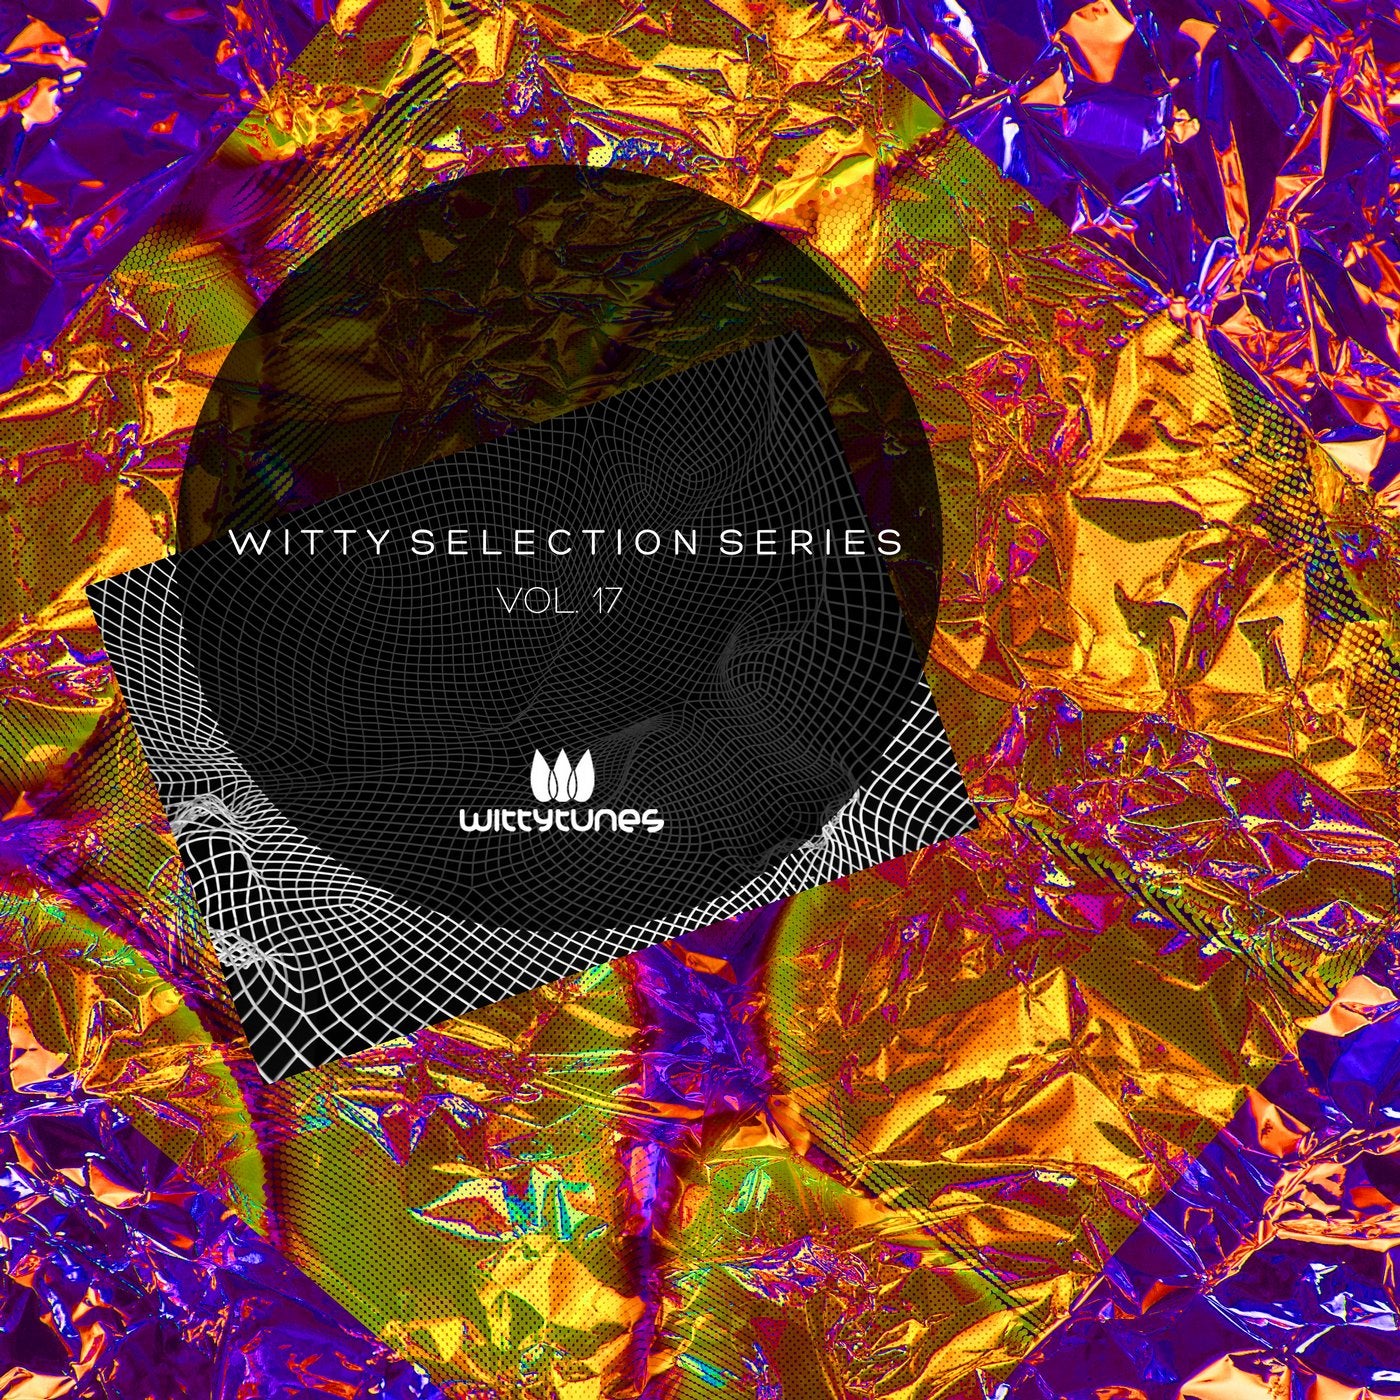 Witty Selection Series Vol. 17